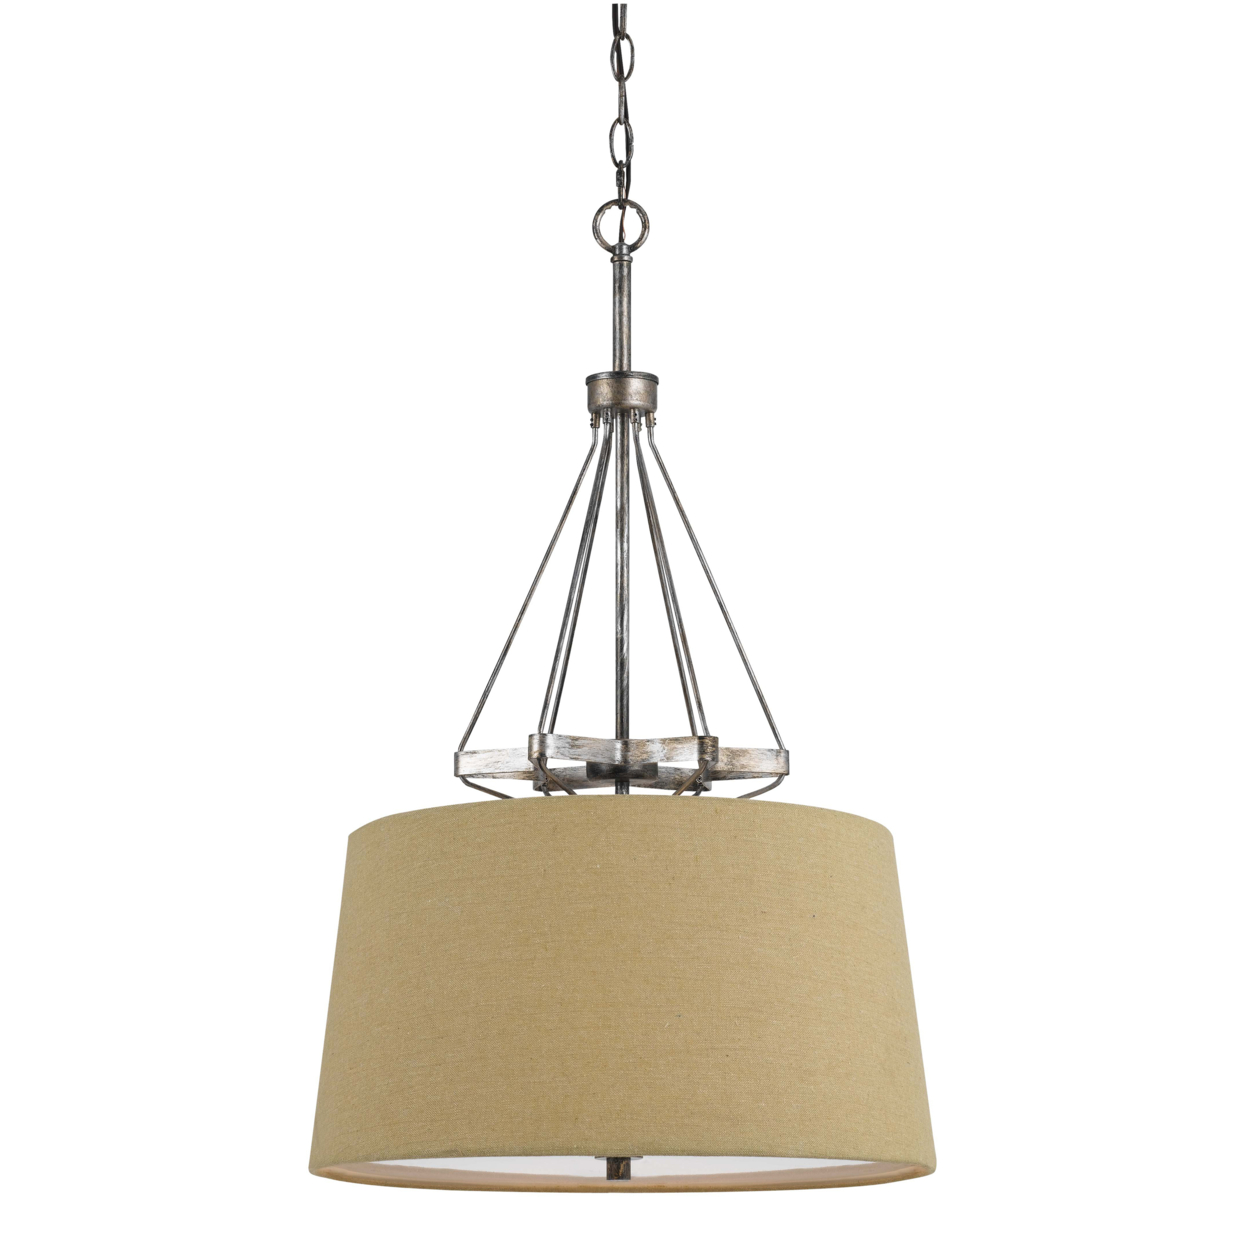 3 Bulb Pendent With Round Burlap Shade And Metal Frame, Beige- Saltoro Sherpi